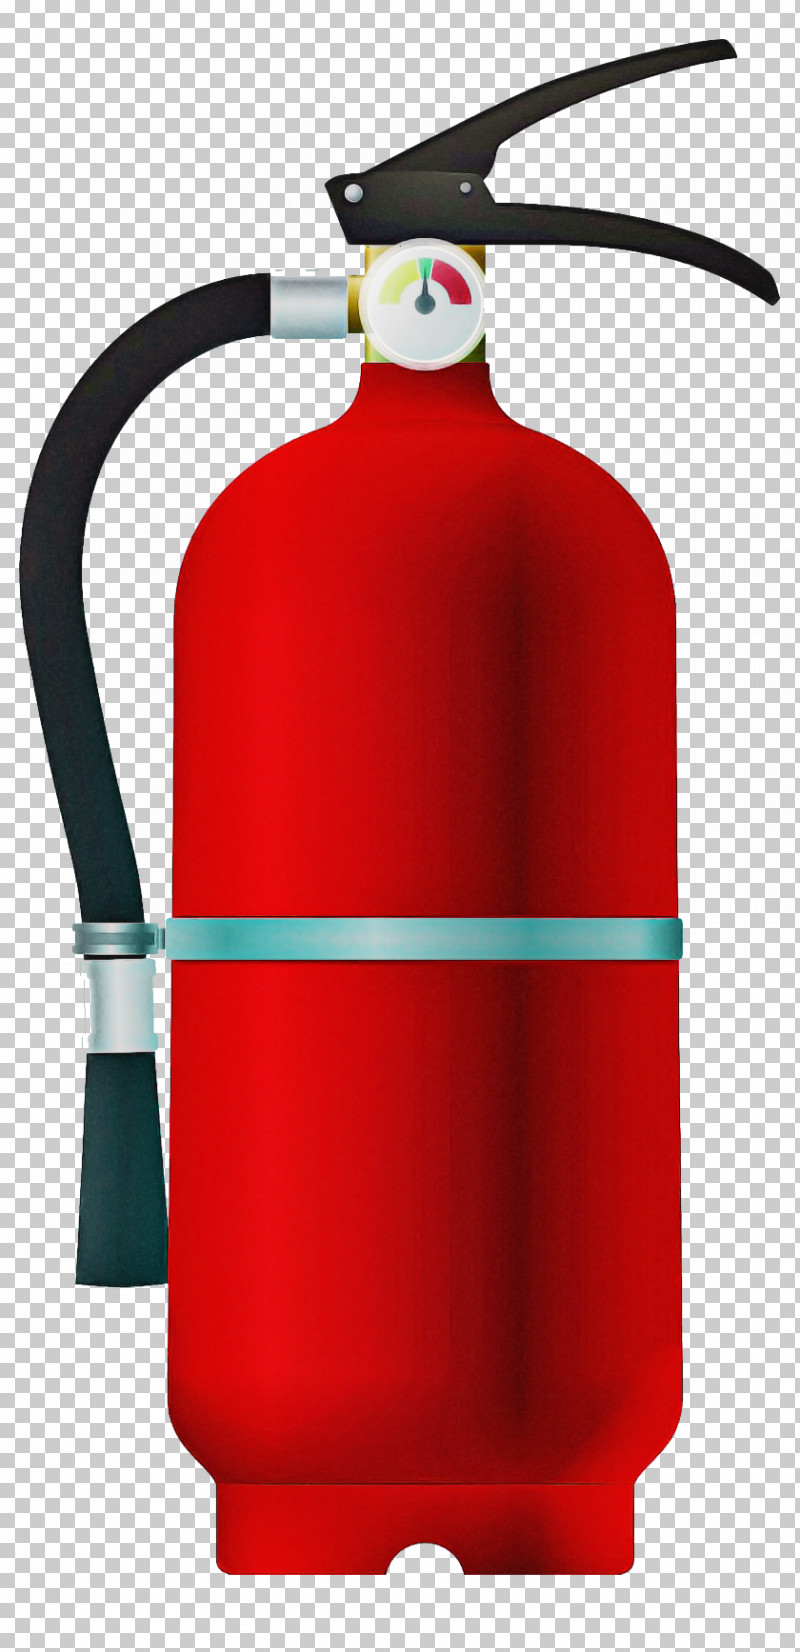 Fire Extinguisher PNG, Clipart, Bromochlorodifluoromethane, Combustion, Fire, Fire Engine, Fire Extinguisher Free PNG Download